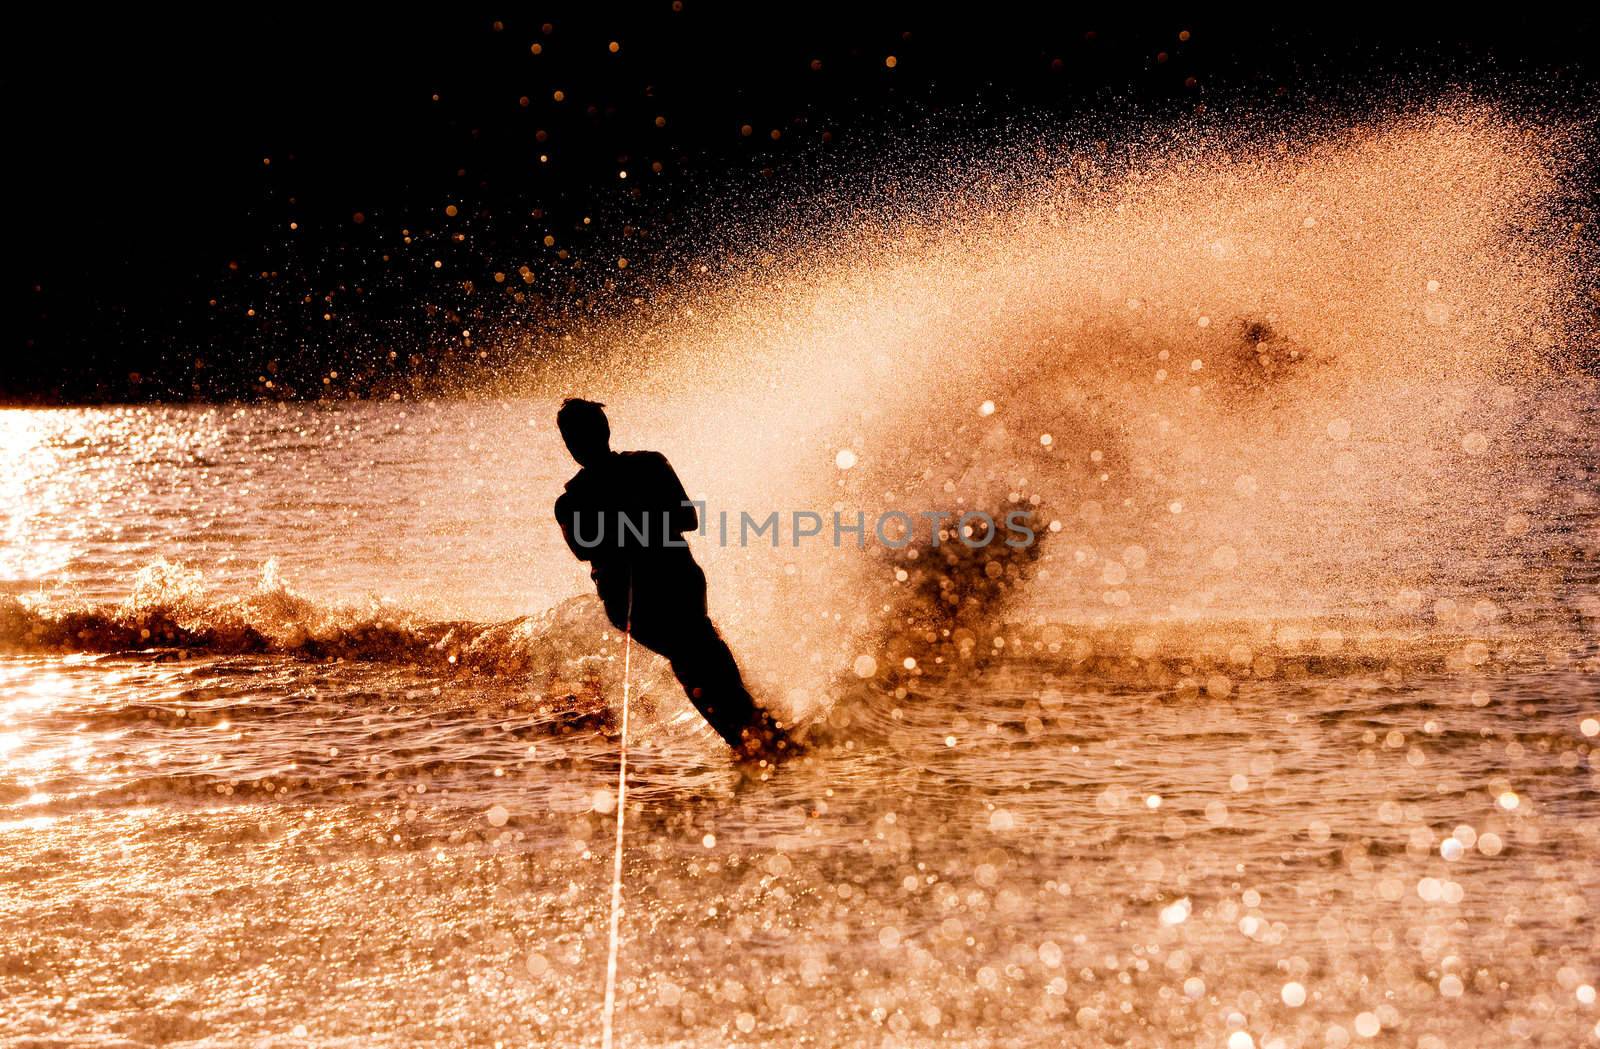 Silhouette of a water skier